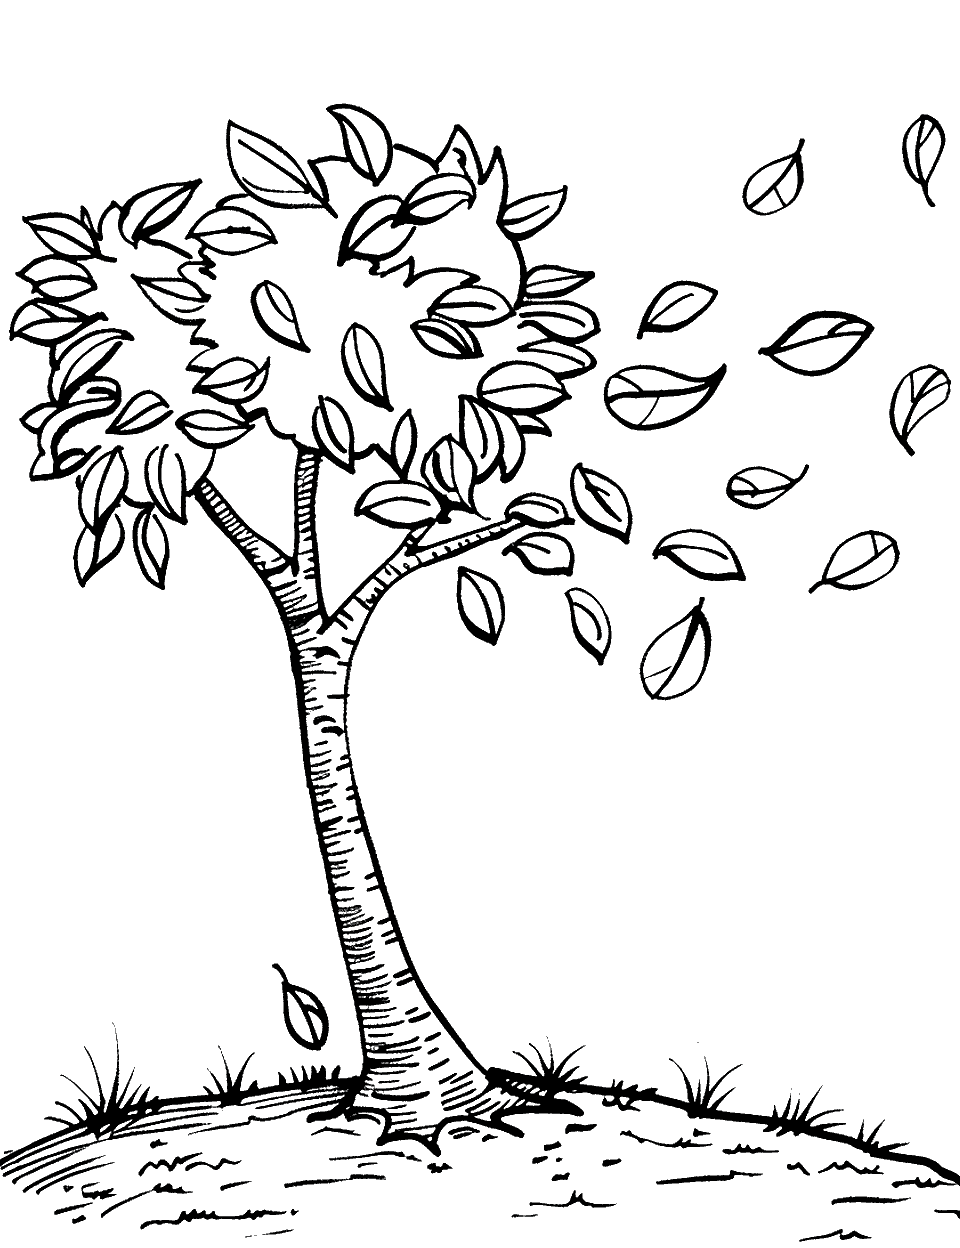 Fall Leaves Scattering Coloring Page - A scene with leaves falling from a tree.